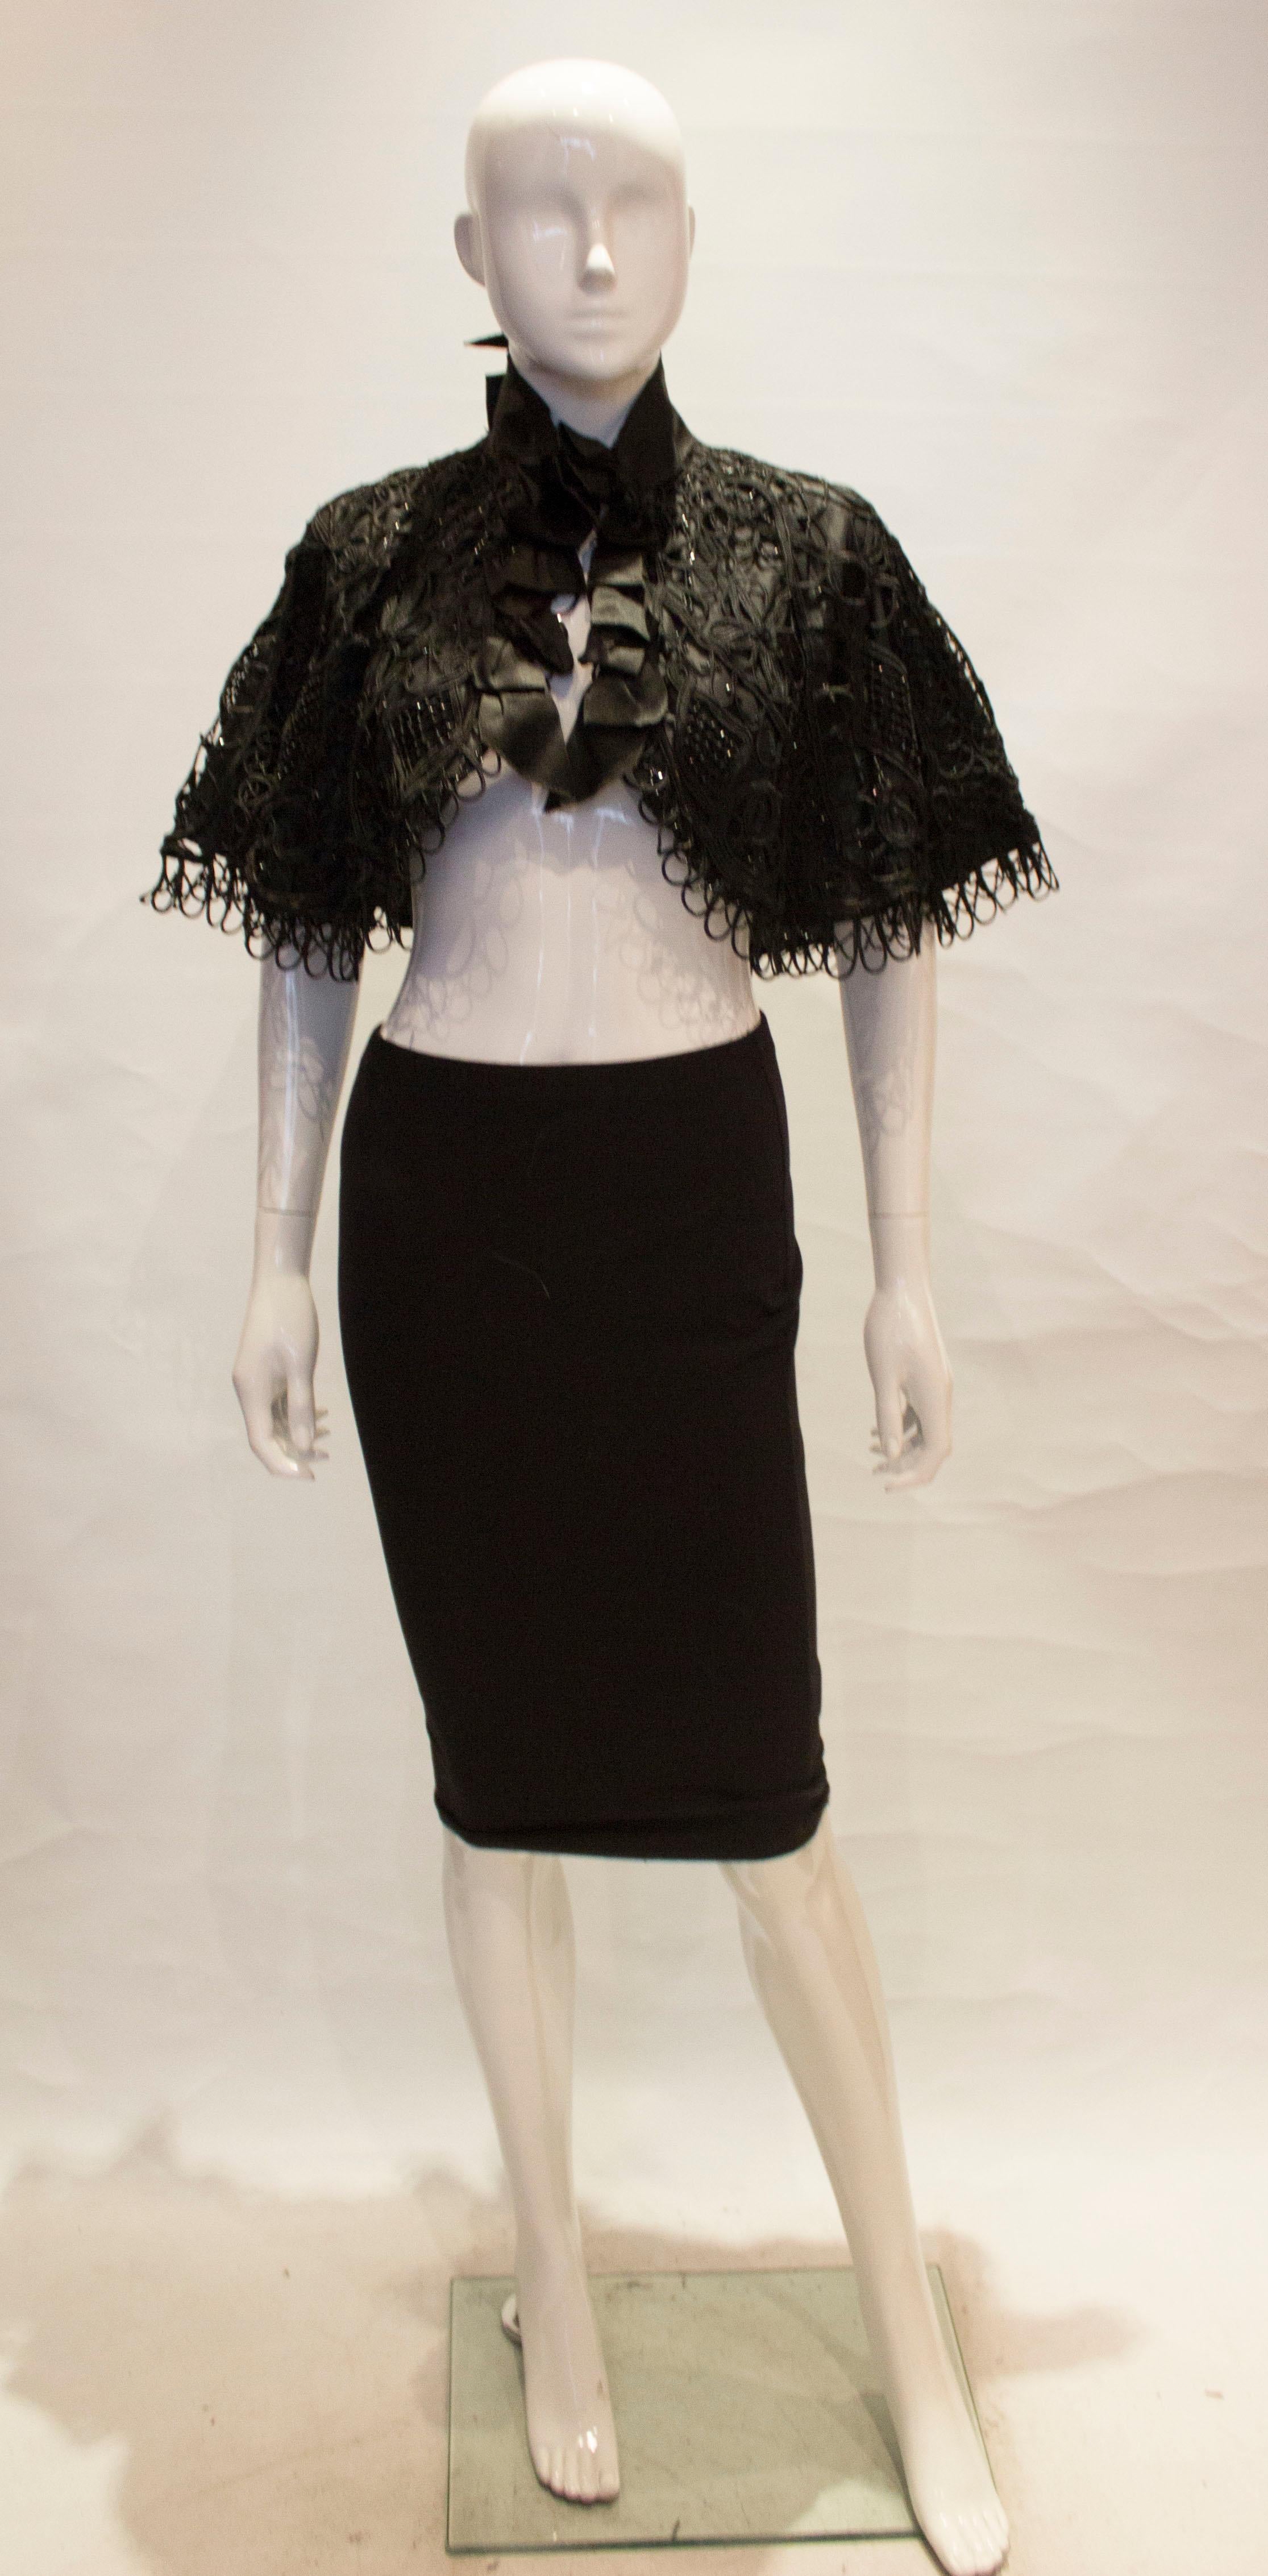 A great addition to your party wardrobe, this vintage black cape has a stand up collar with bow detail. The outer layer has bead and lace detail and it is silk lined.

Measurements: shoulder to shoulder 22'', length 18''